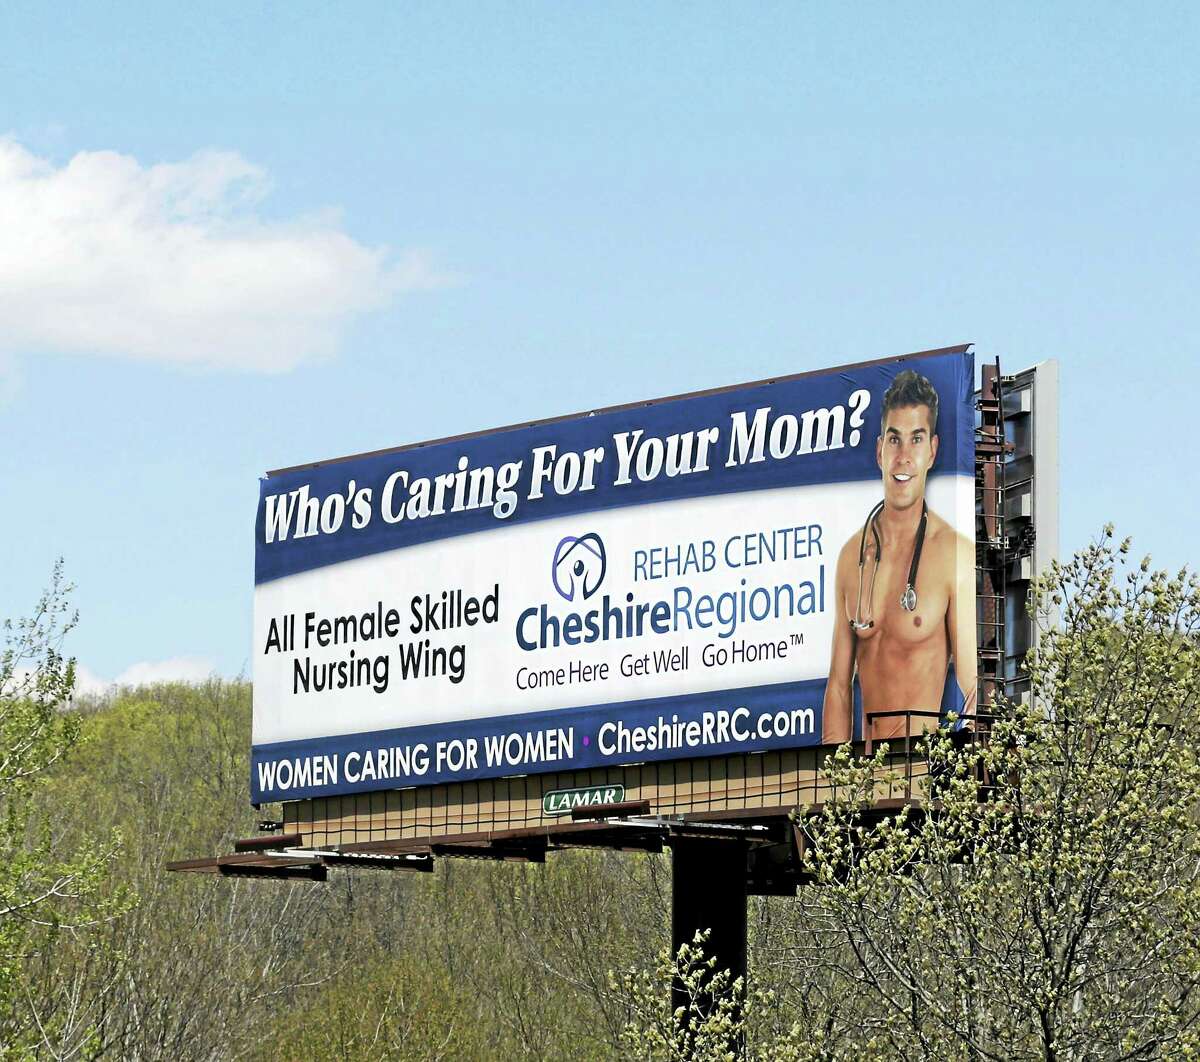 Cheshire Regional Rehab Center’s billboard on Interstate 84 has been taken down and will be replaced after public outcry.